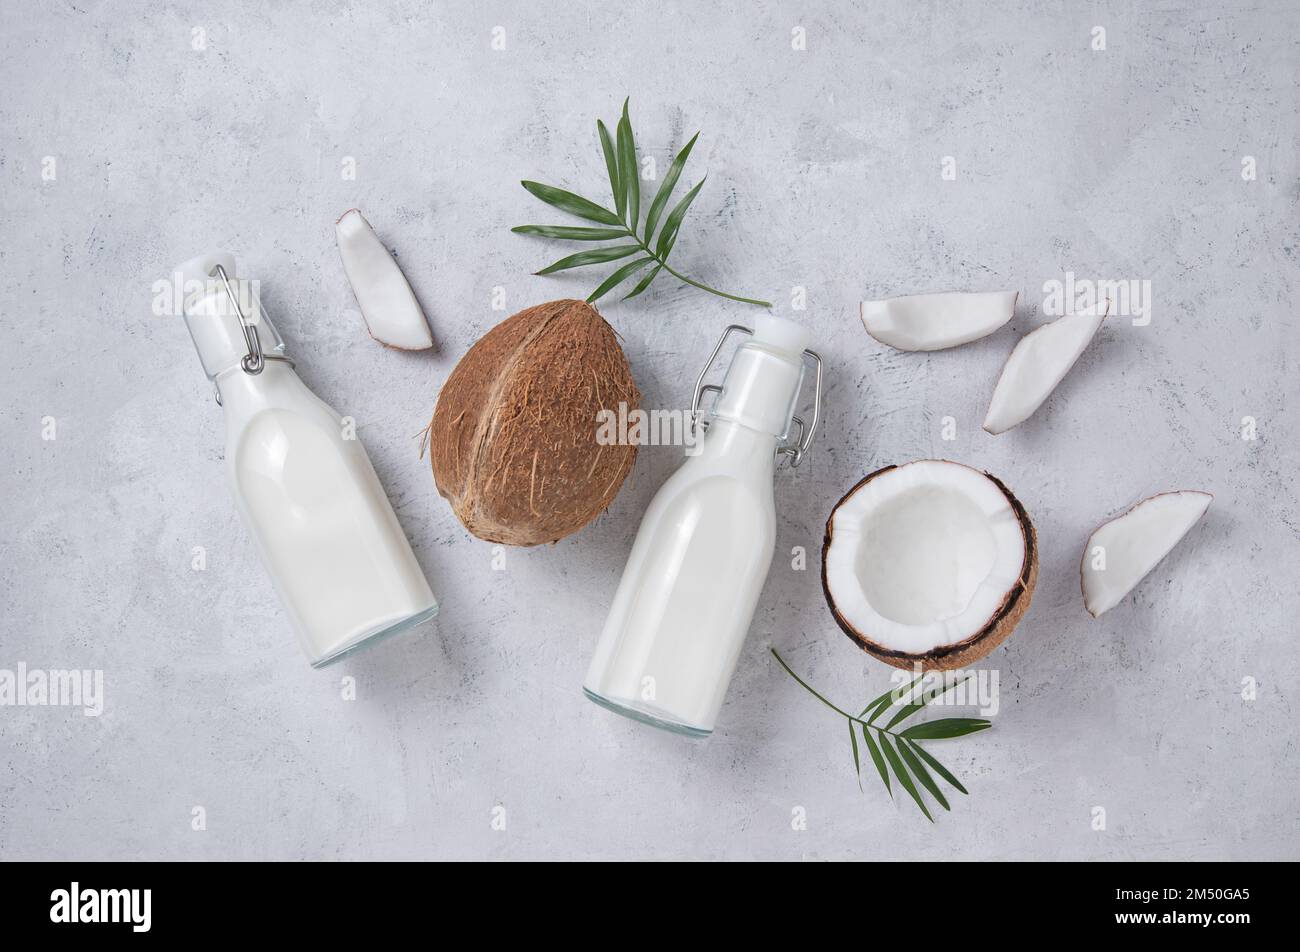 Healthy flat lay concept. Vegan milk bottles, coconut slices and palm branch on gray background. Top  view image Stock Photo